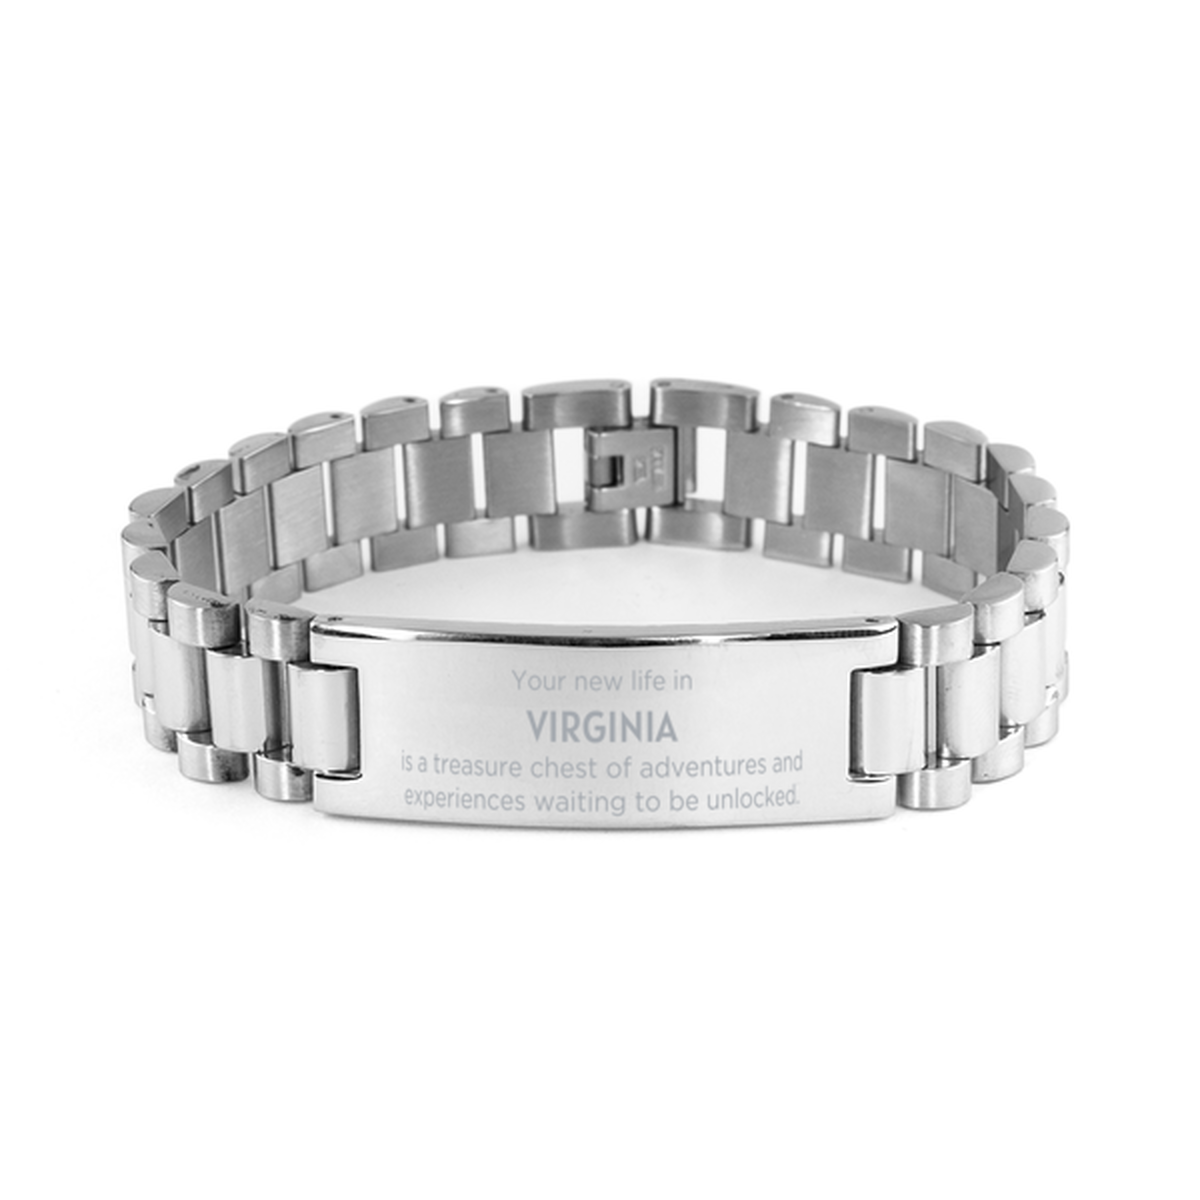 Moving to Virginia Gifts, Your new life in Virginia, Long Distance Virginia Christmas Ladder Stainless Steel Bracelet For Men, Women, Friends, Coworkers